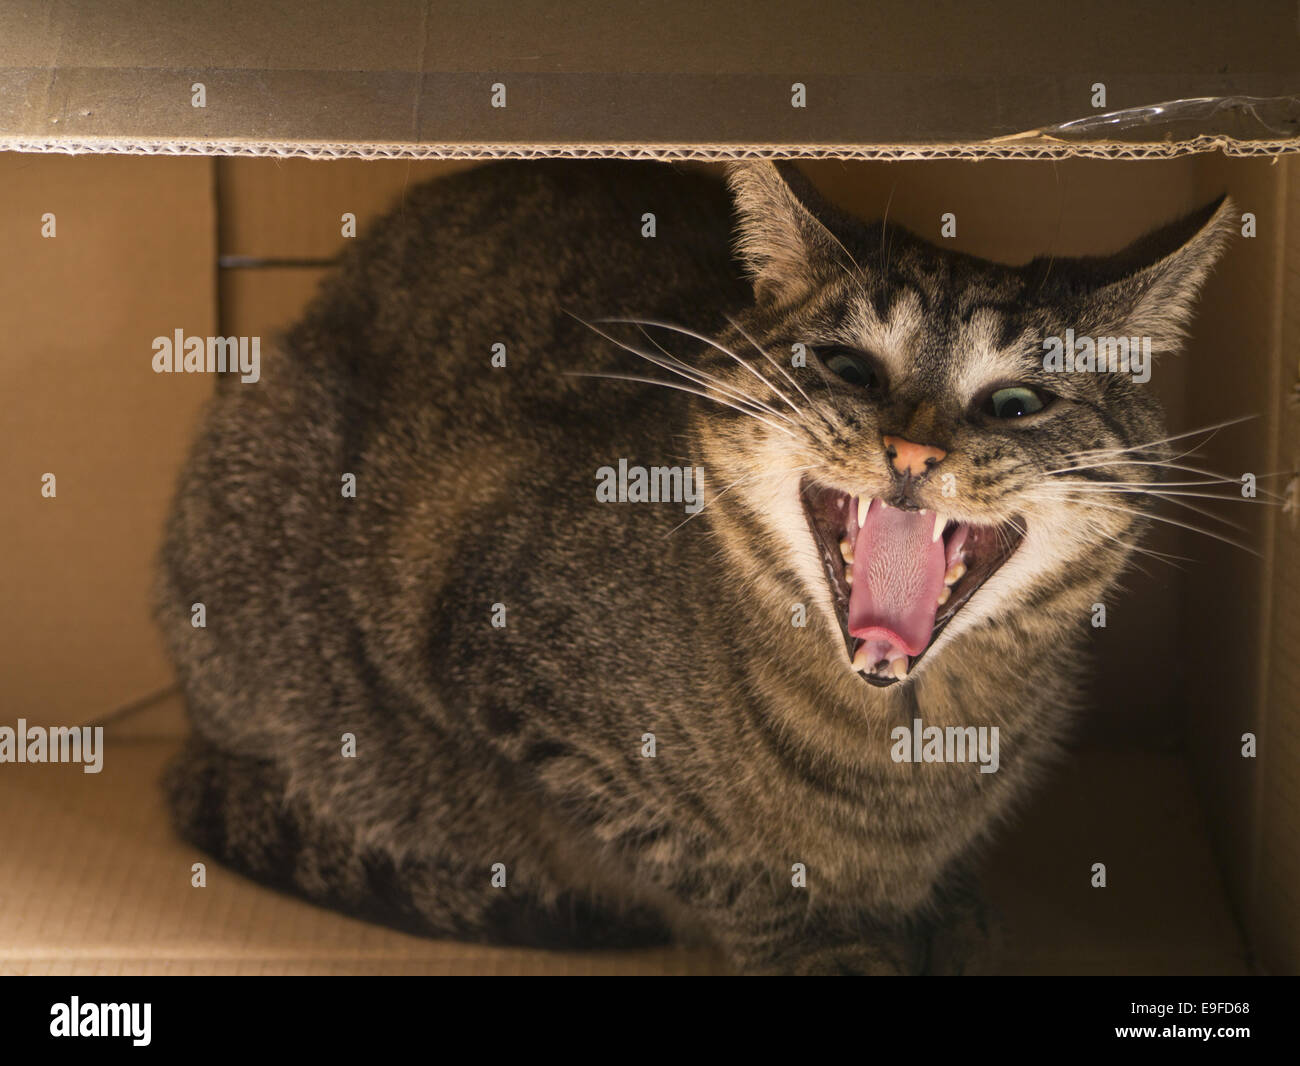 Hissing cat in a carton Stock Photo